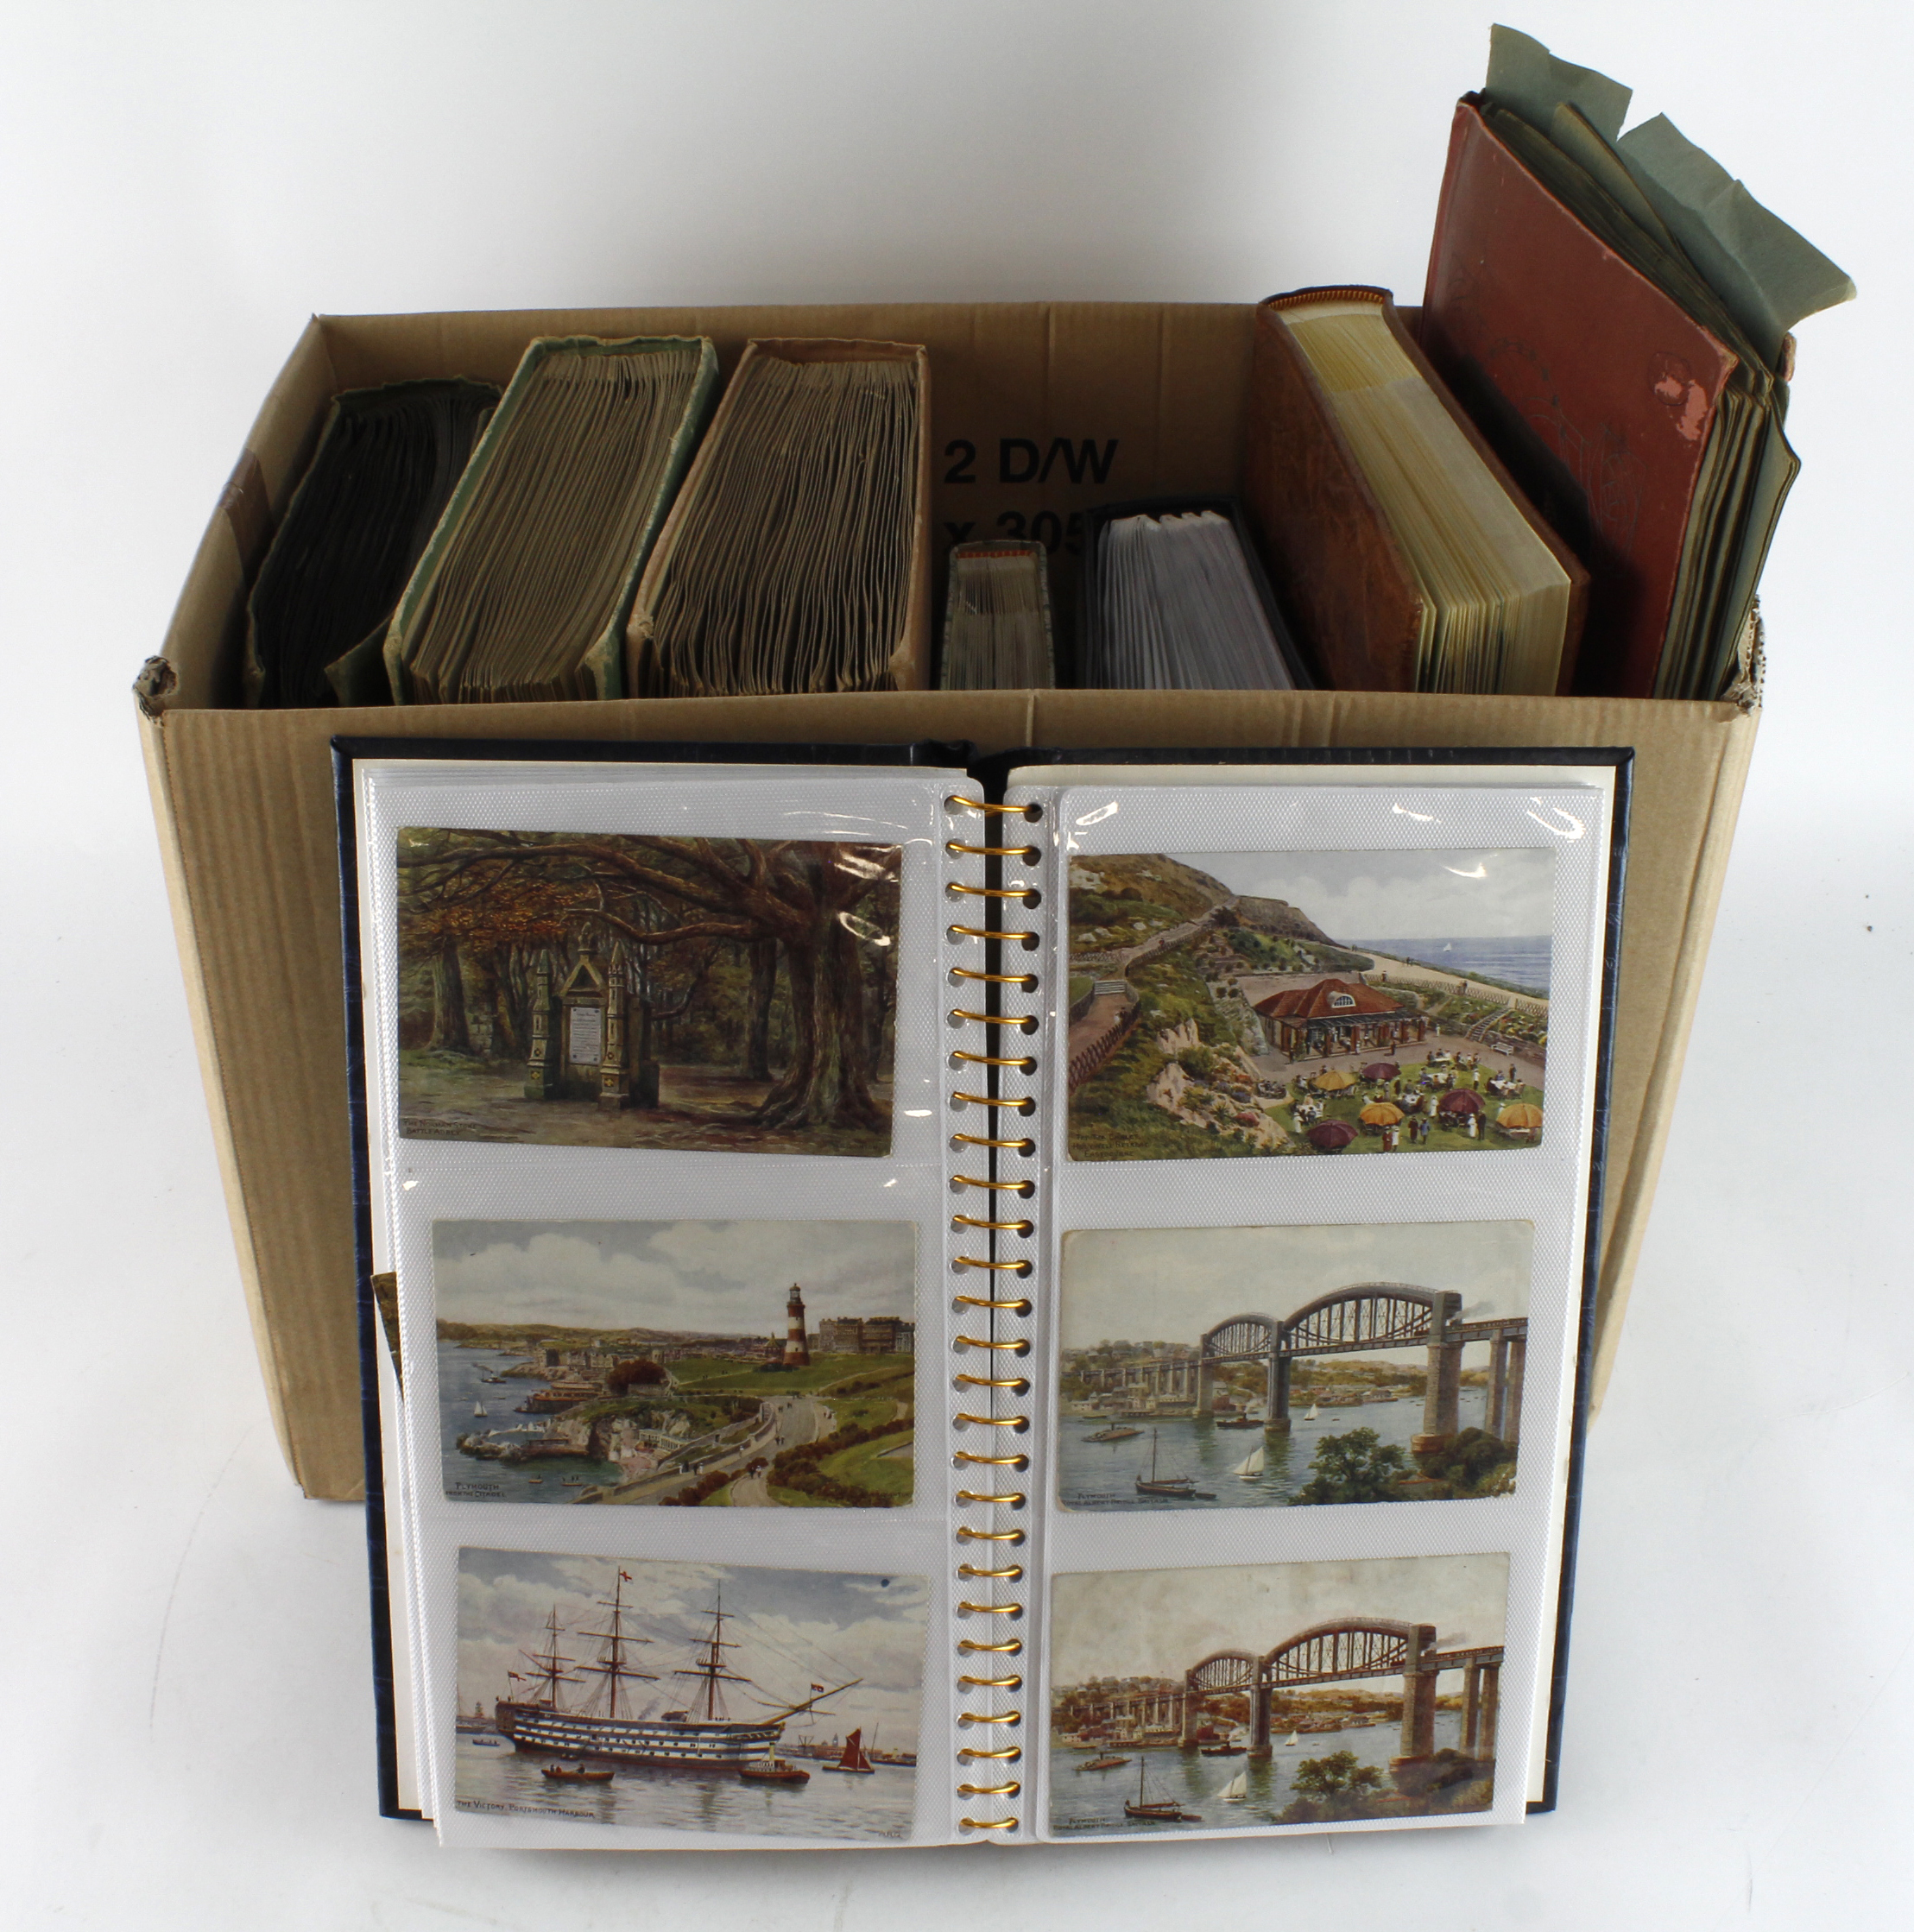 Large box full of various postcard collection in old and modern binders, lots of old postcards, some